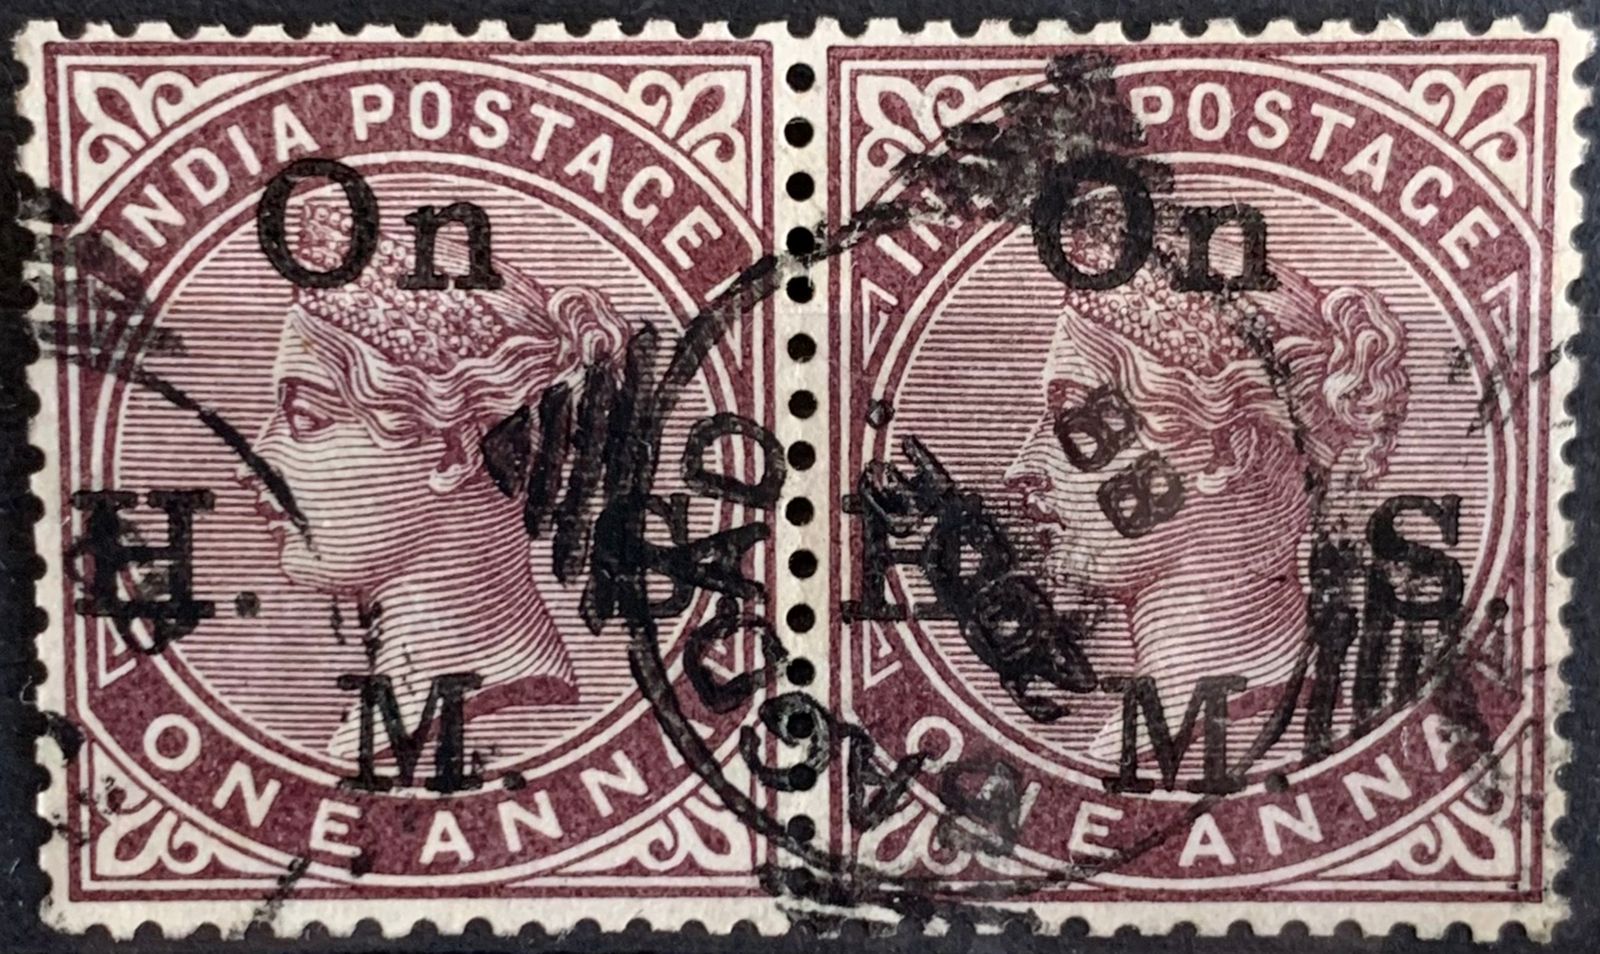 India 1883 QV OnHMS 1a Pair used Abroad in BAGDAD Fine Cancelled